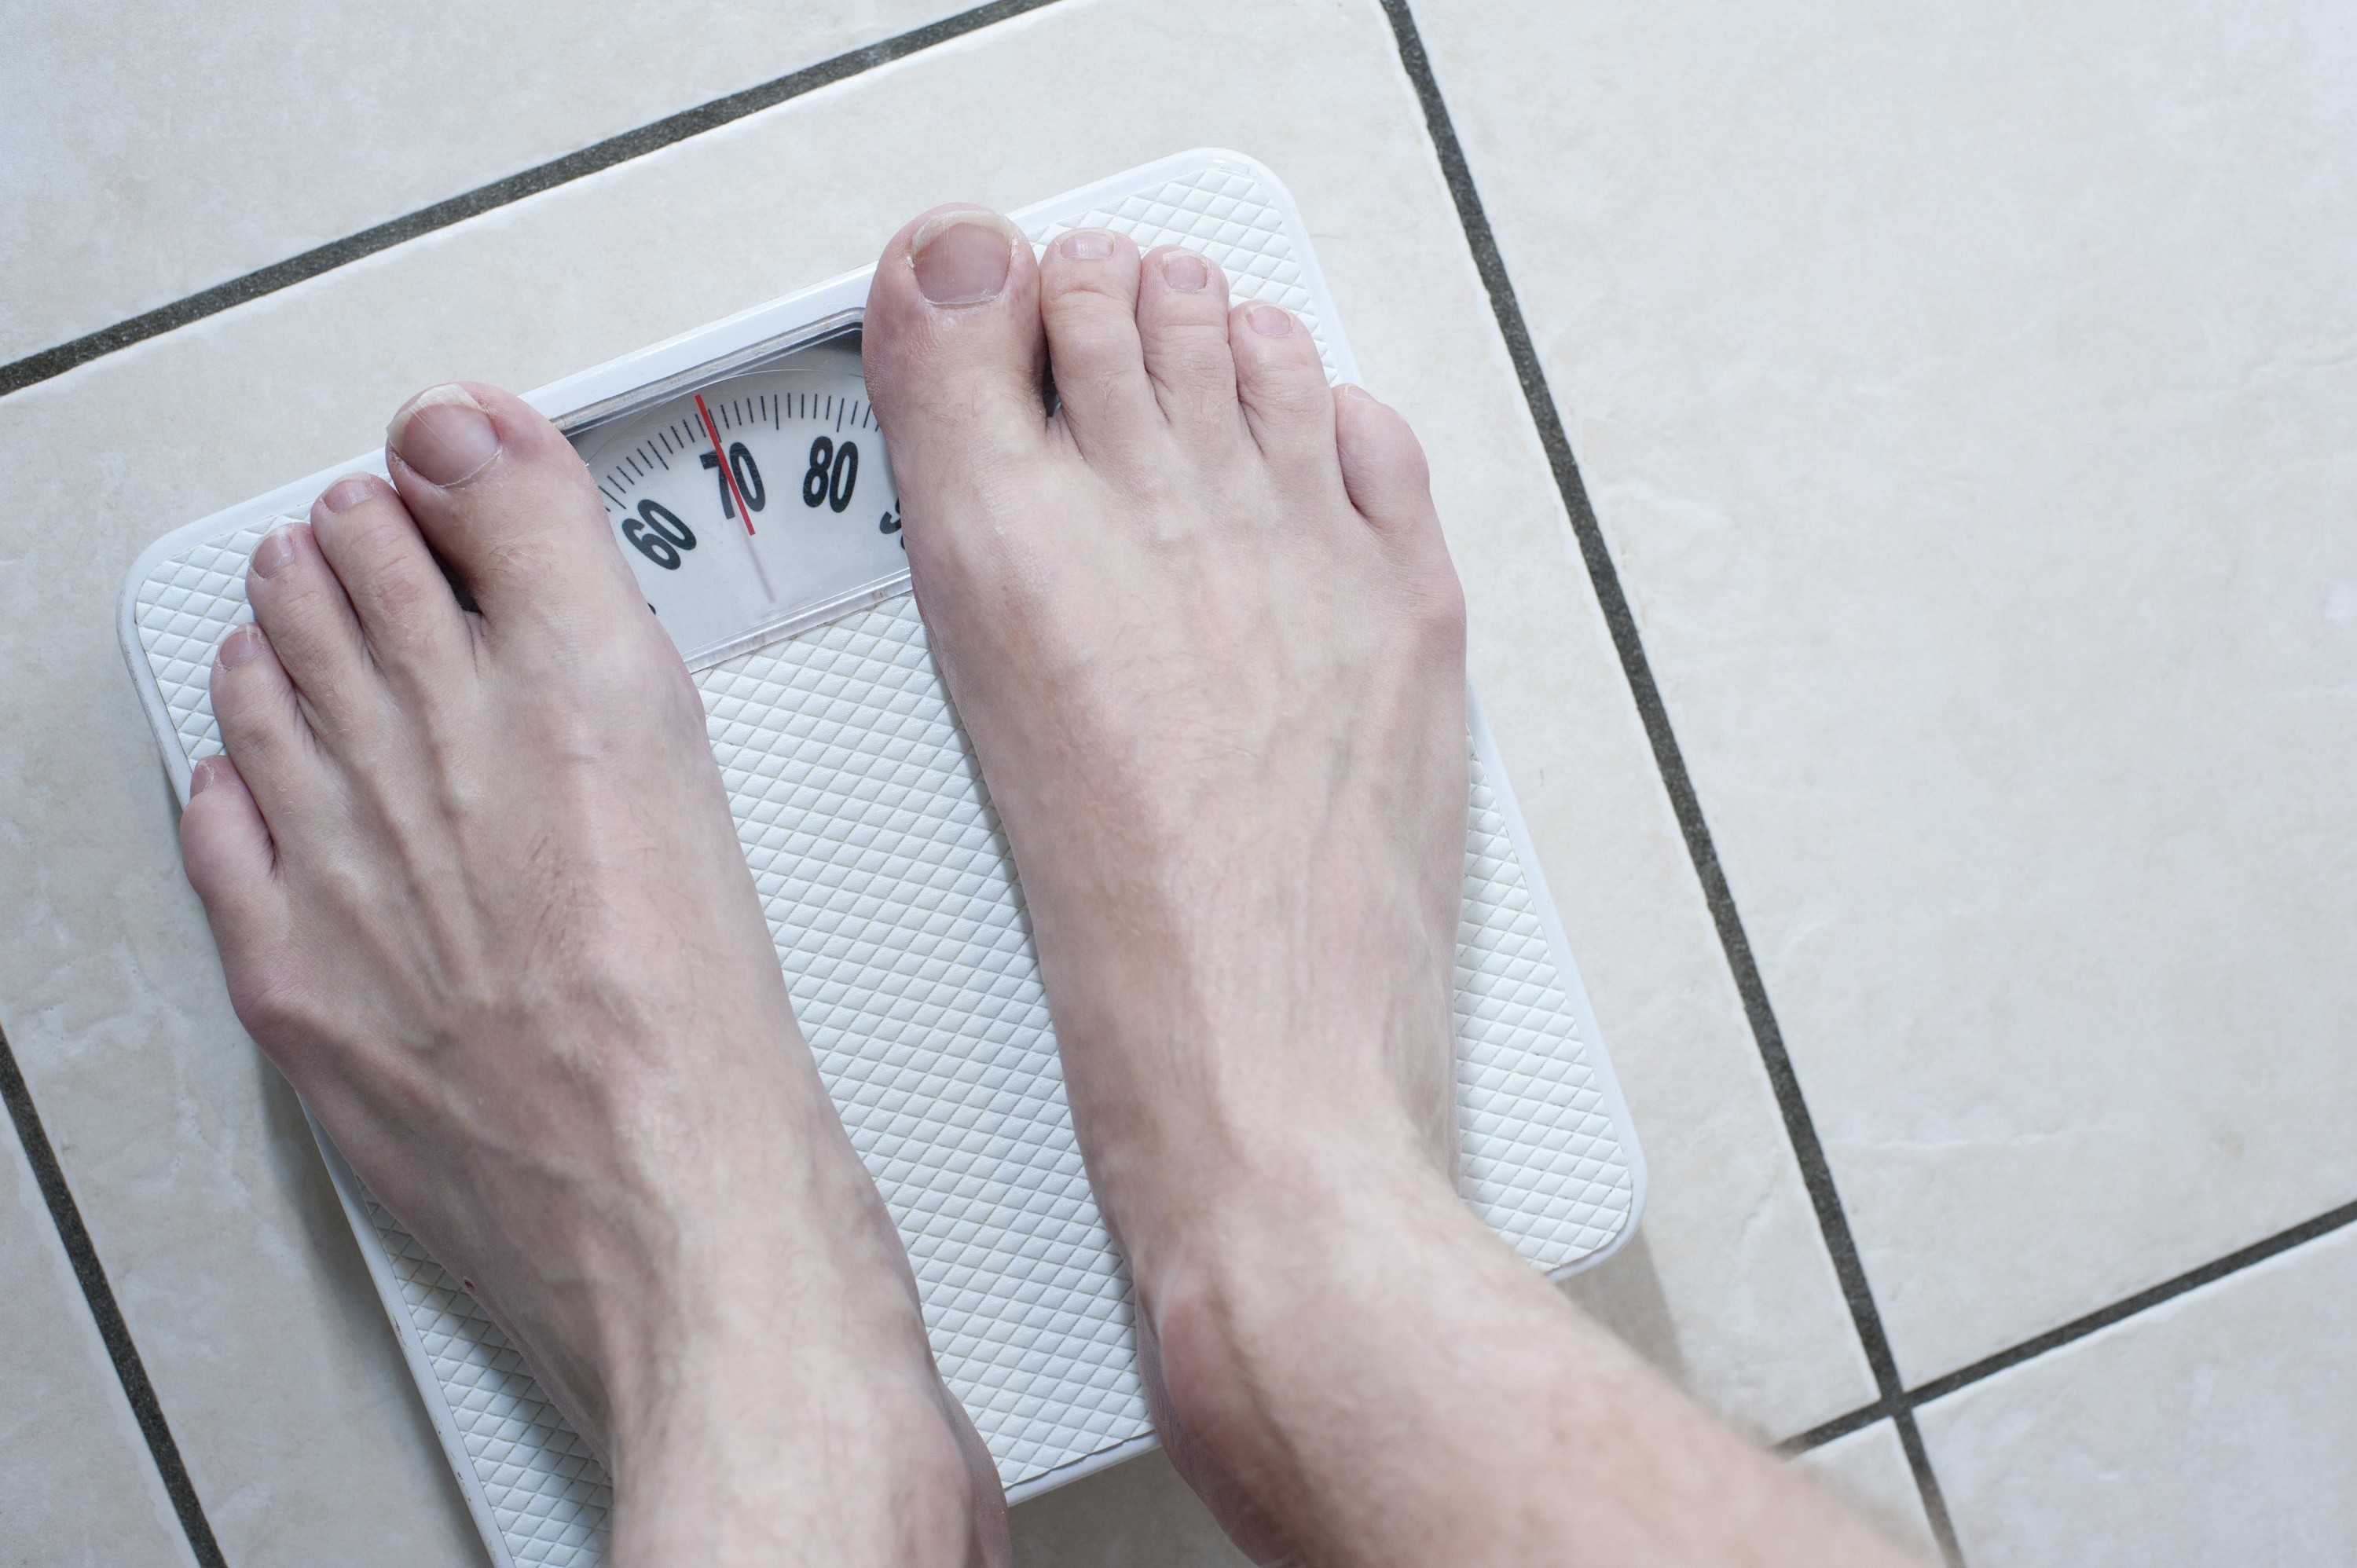 Free image of bathroom scales